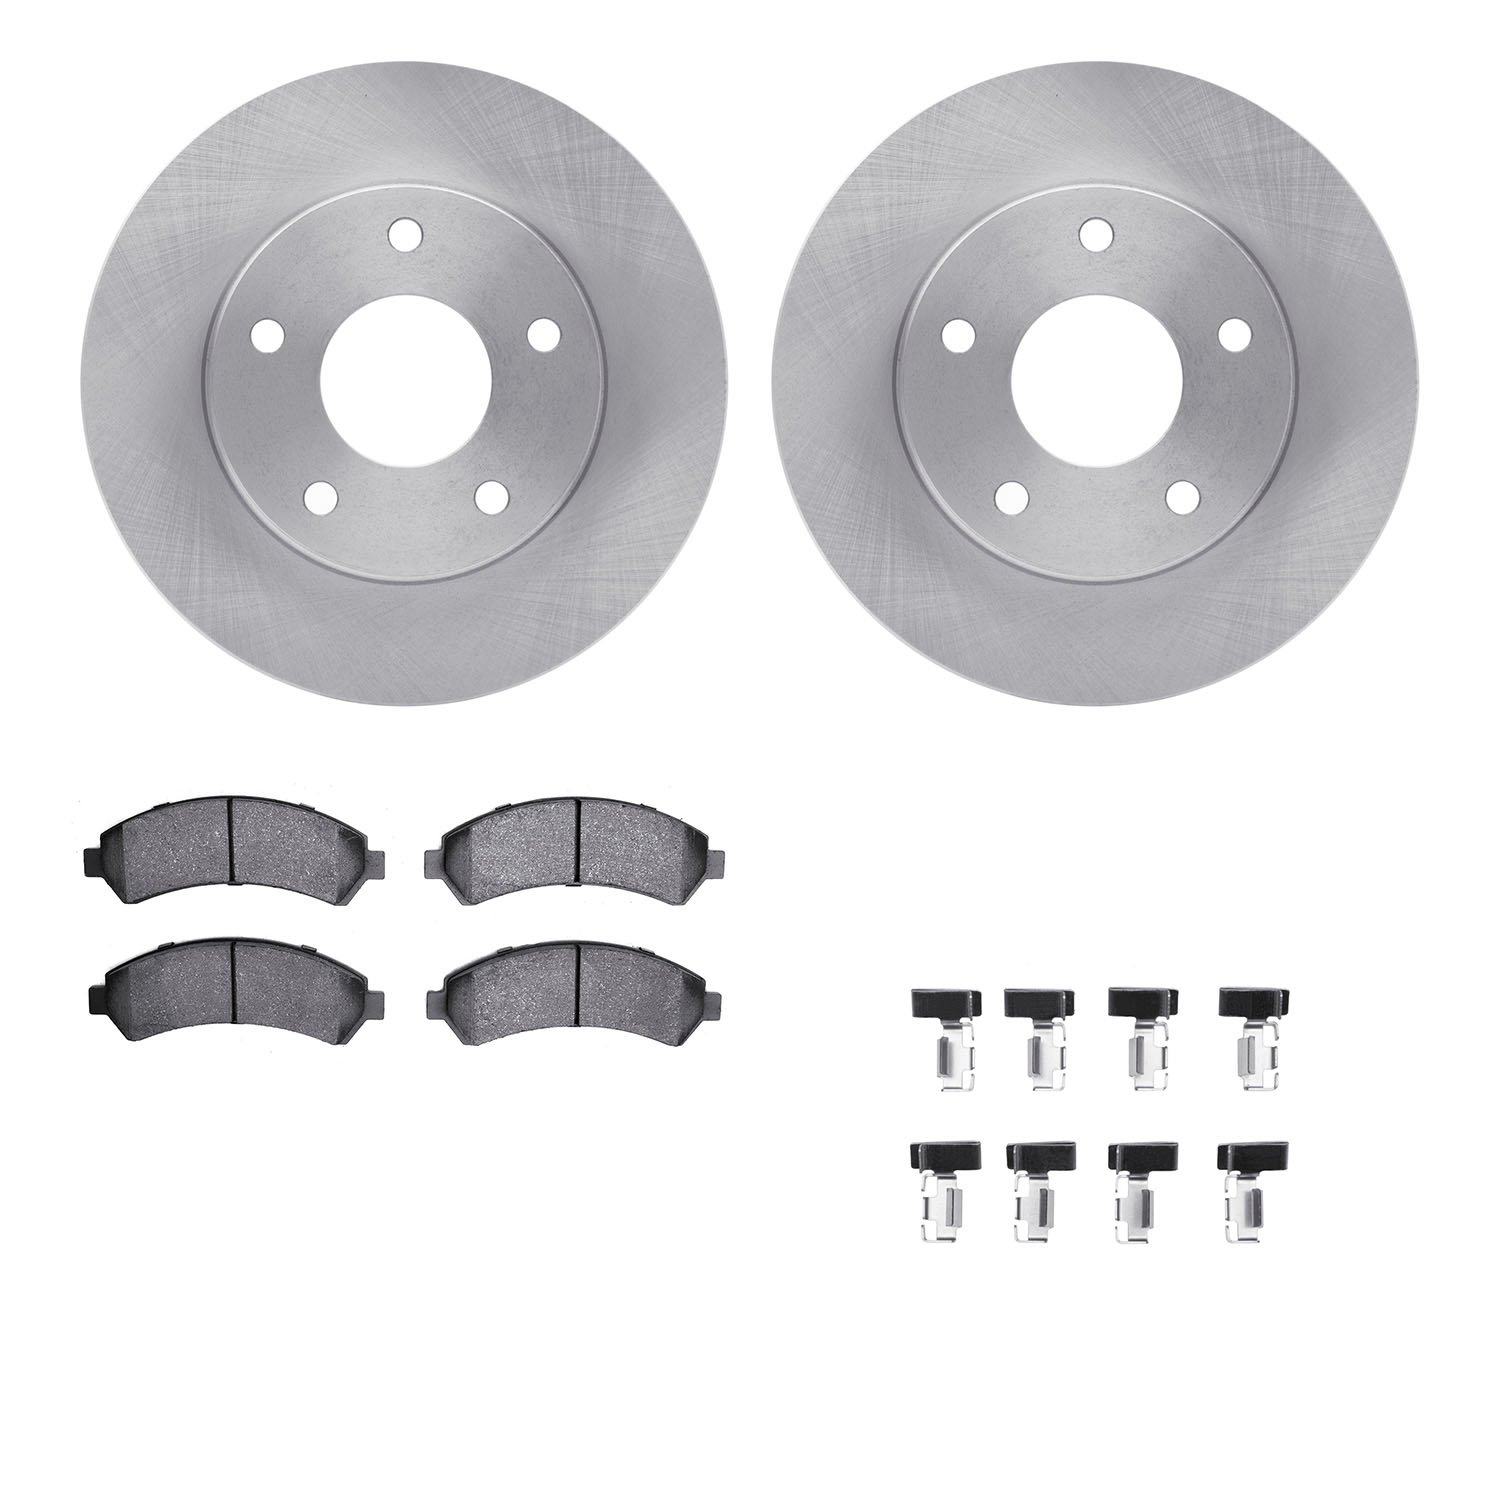 6412-48058 Brake Rotors with Ultimate-Duty Brake Pads Kit & Hardware, 1997-2005 GM, Position: Front